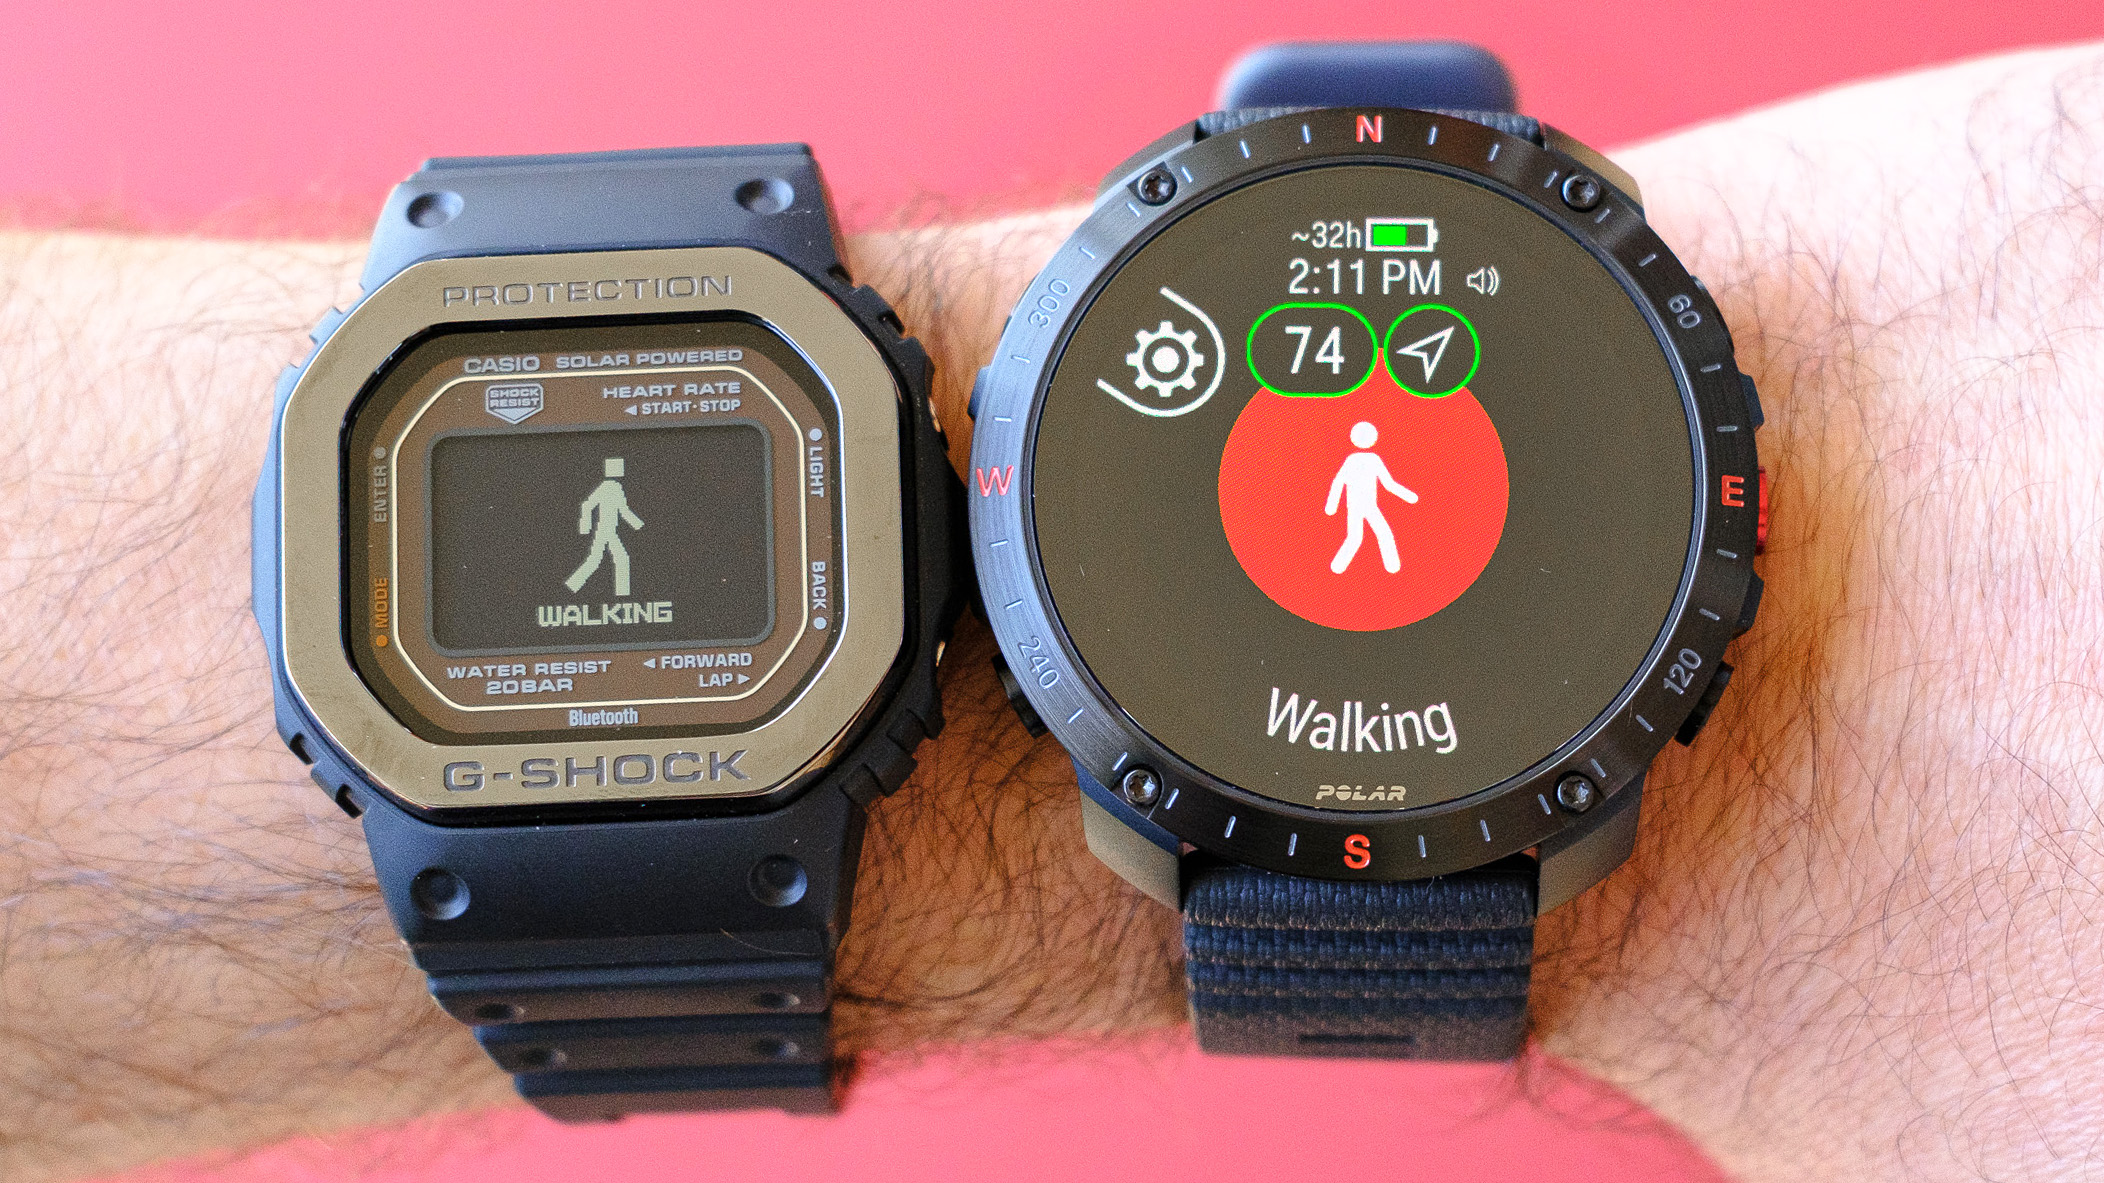 The G-Shock Move and Polar Grit X2 Pro smartwatches on the same wrist.